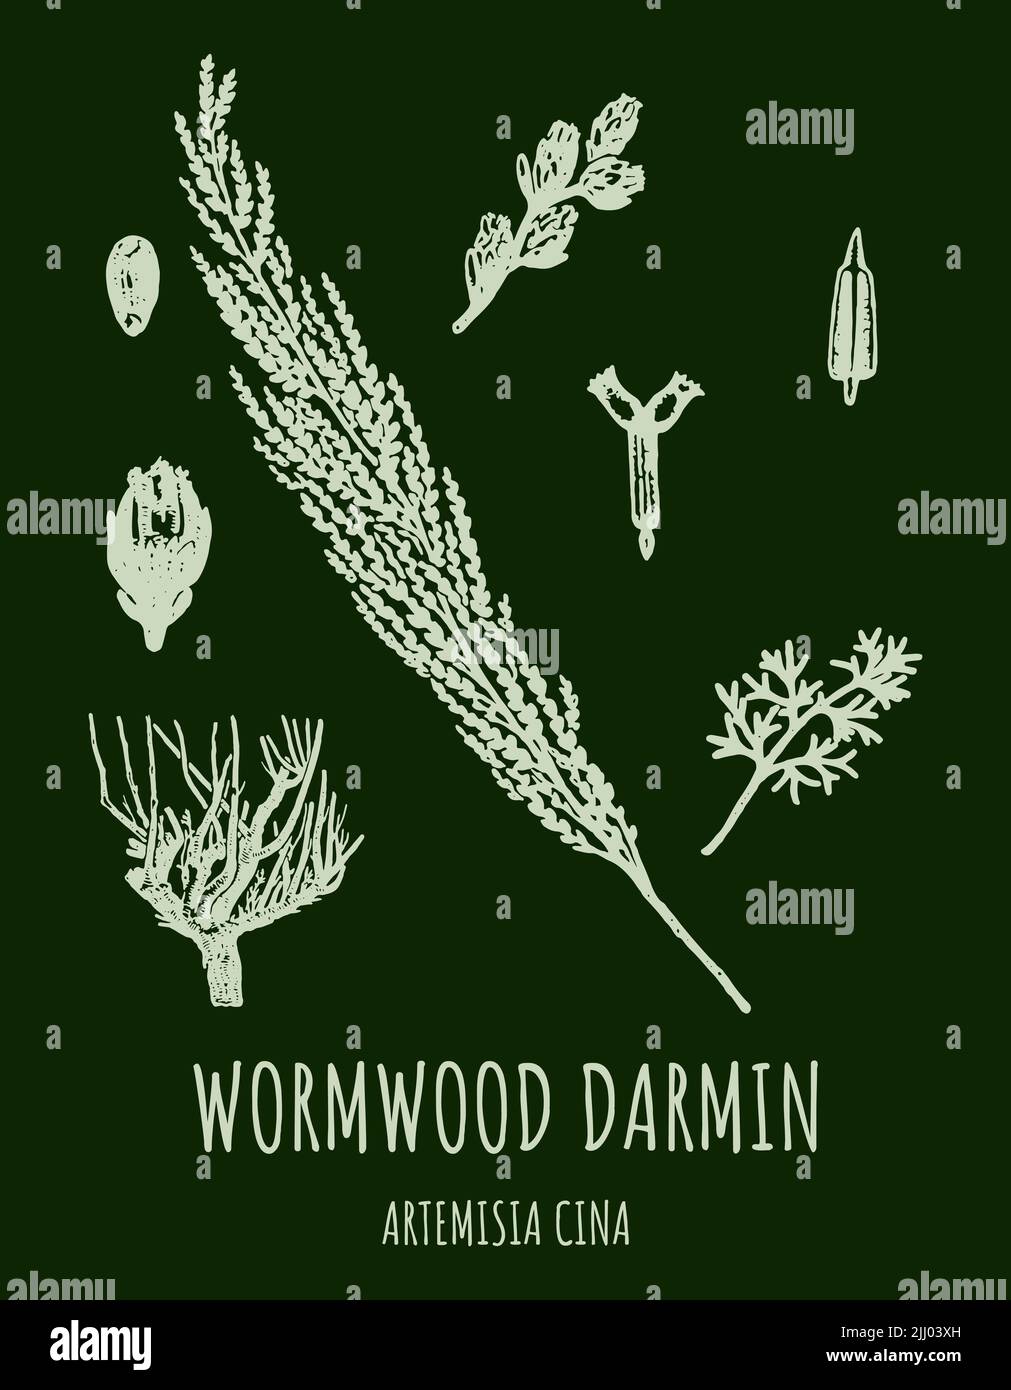 DARMIN Wormwood (Artemisia cina) illustration. Wormwood branch, leaves and wormwood flowers. Cosmetics and medical plant. Stock Photo